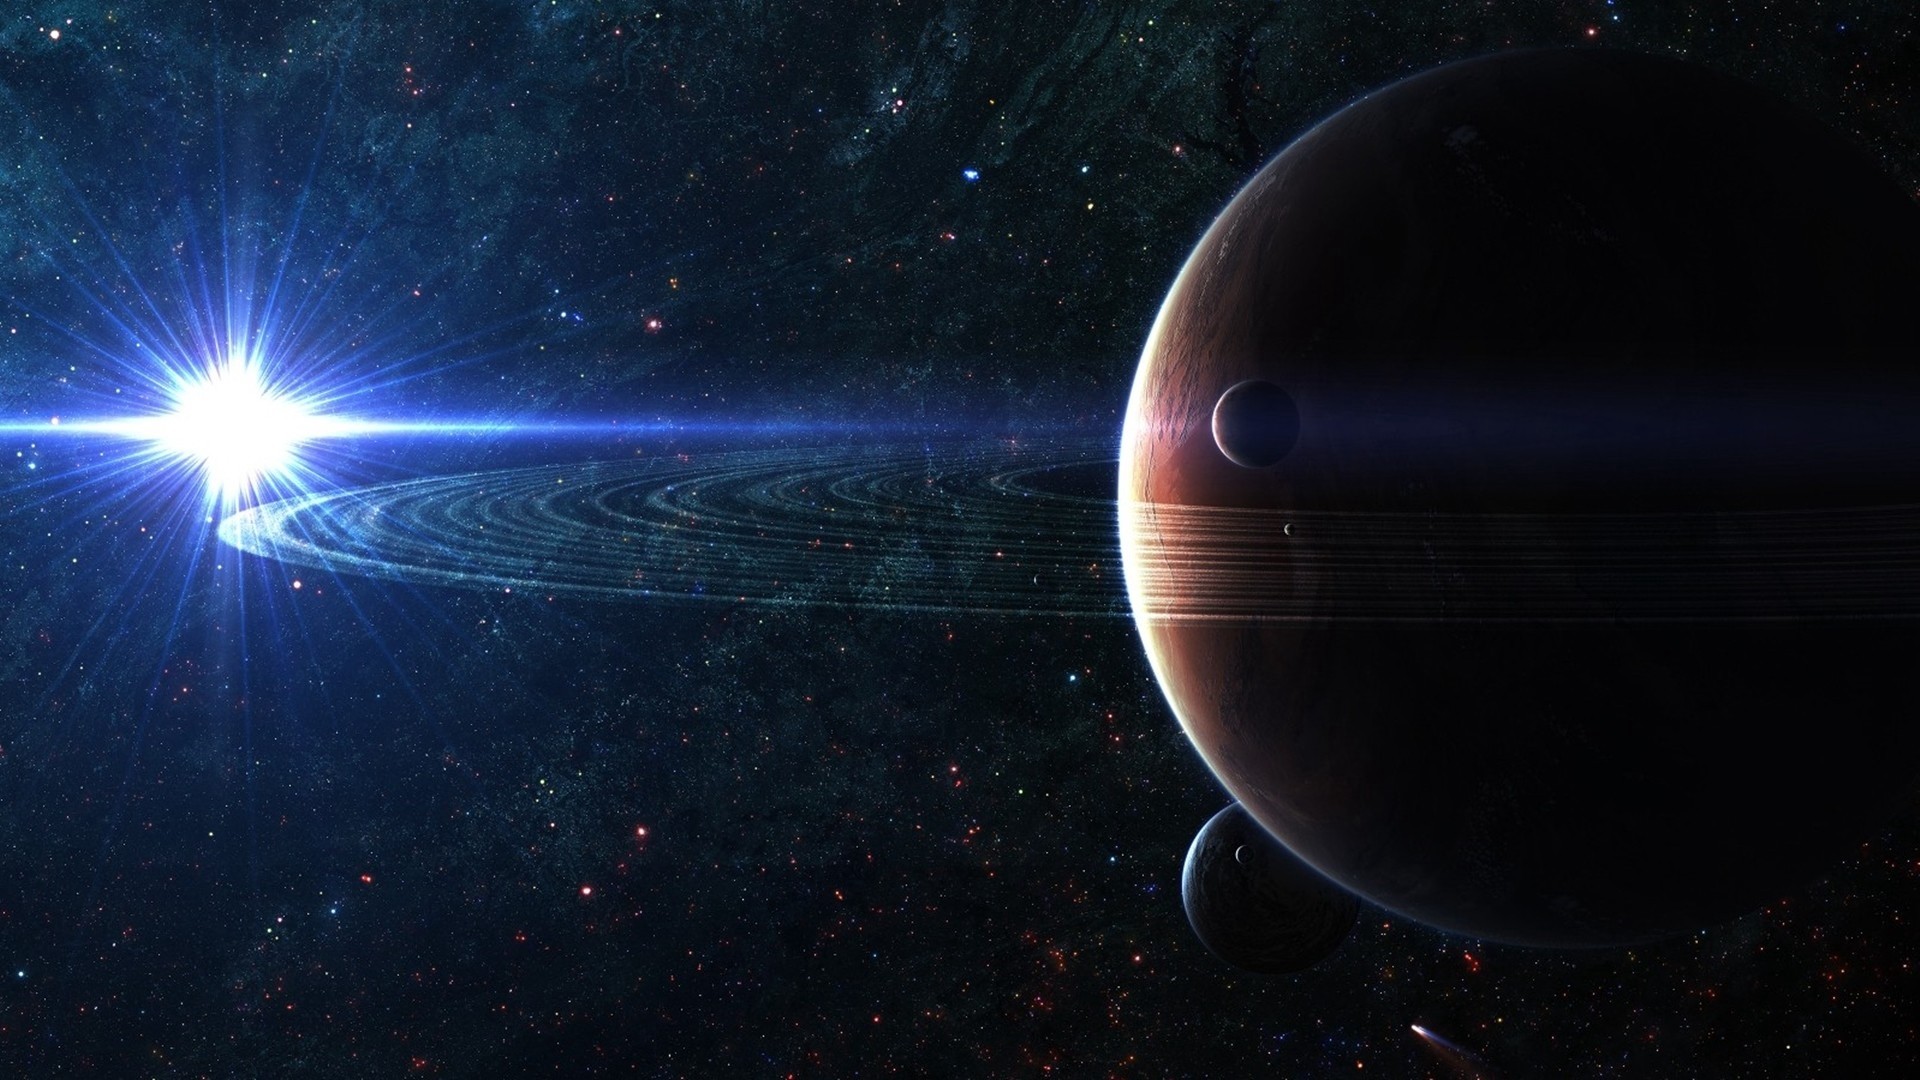 1920x1080 Resolution PC Planets Wallpapers: Wallpapers and Pictures for PC